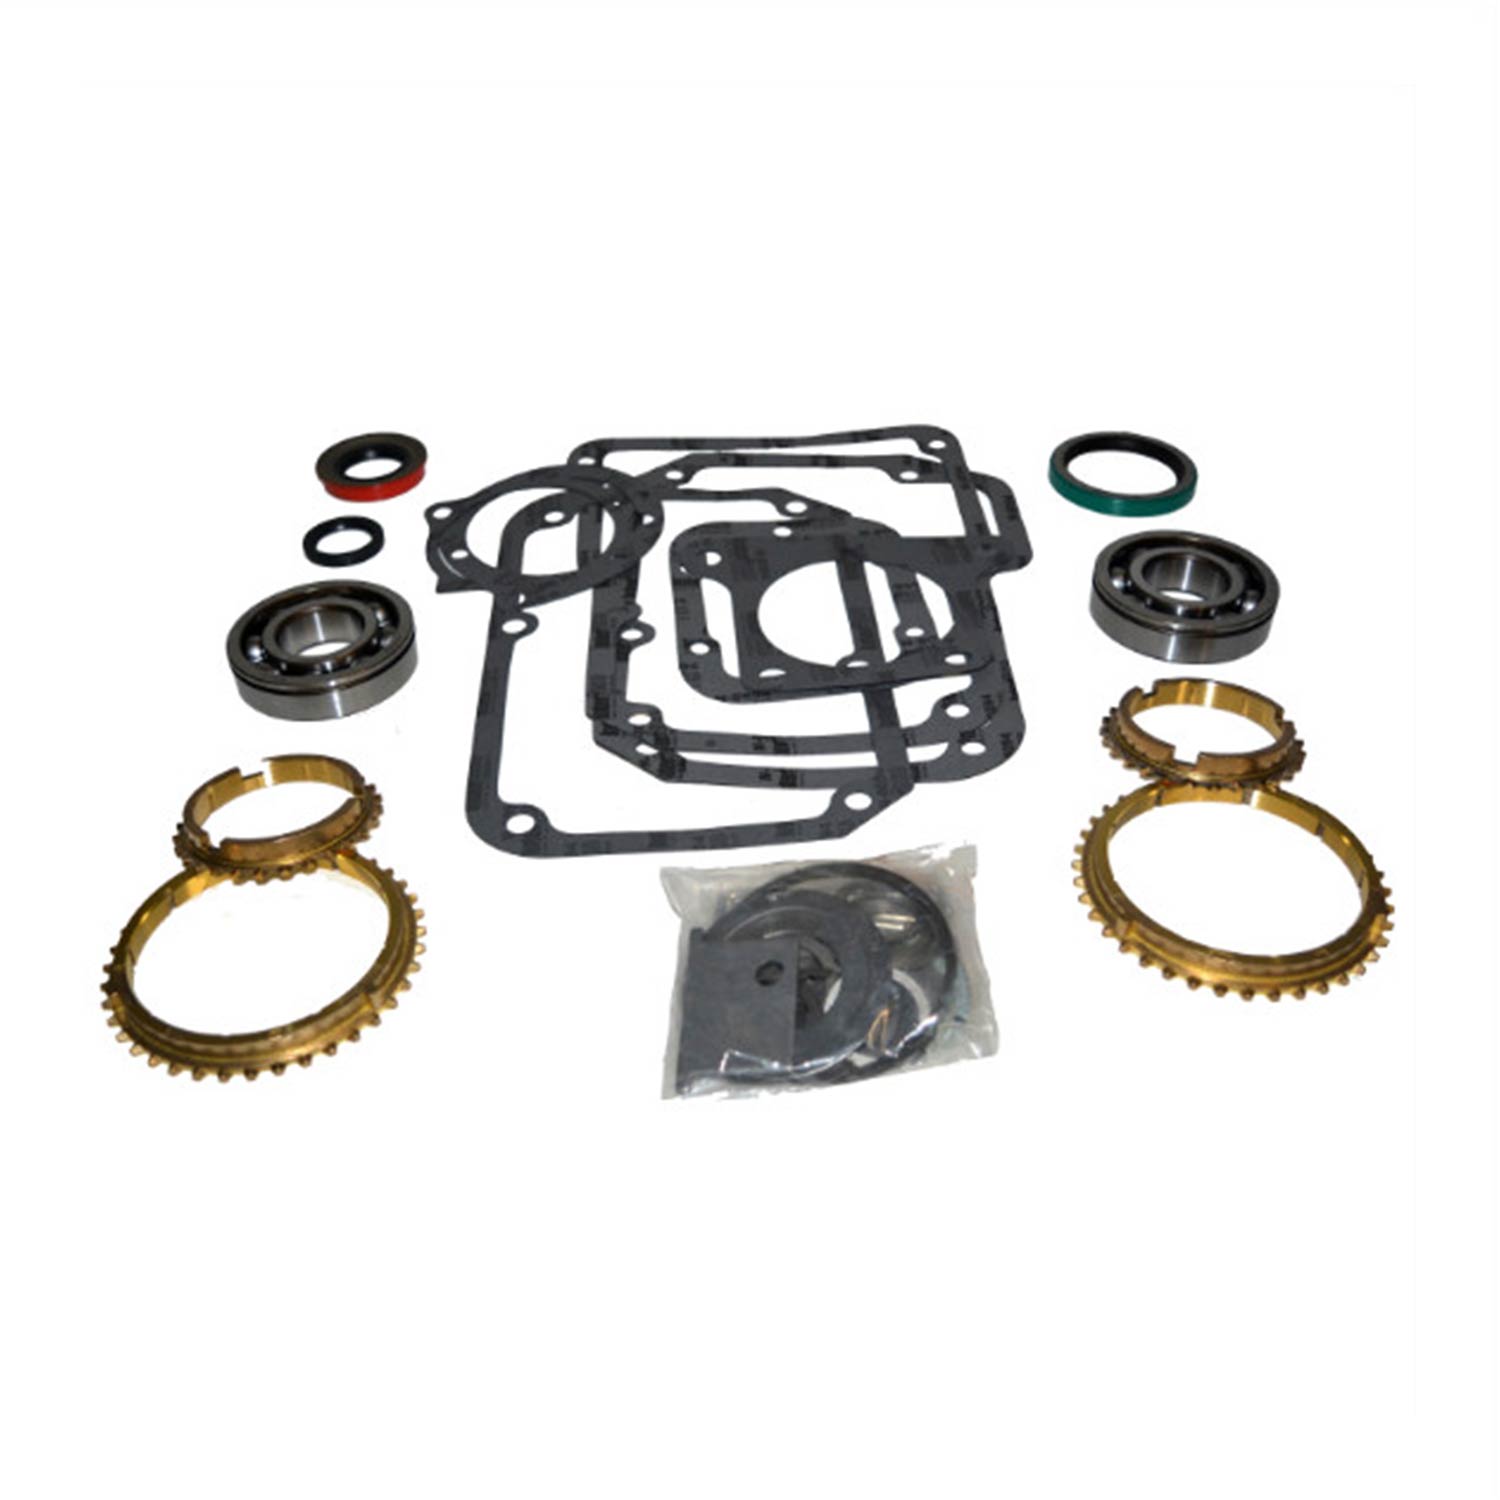 USA Standard 77267 Manual Transmission T19 Bearing Kit, With Synchro'S